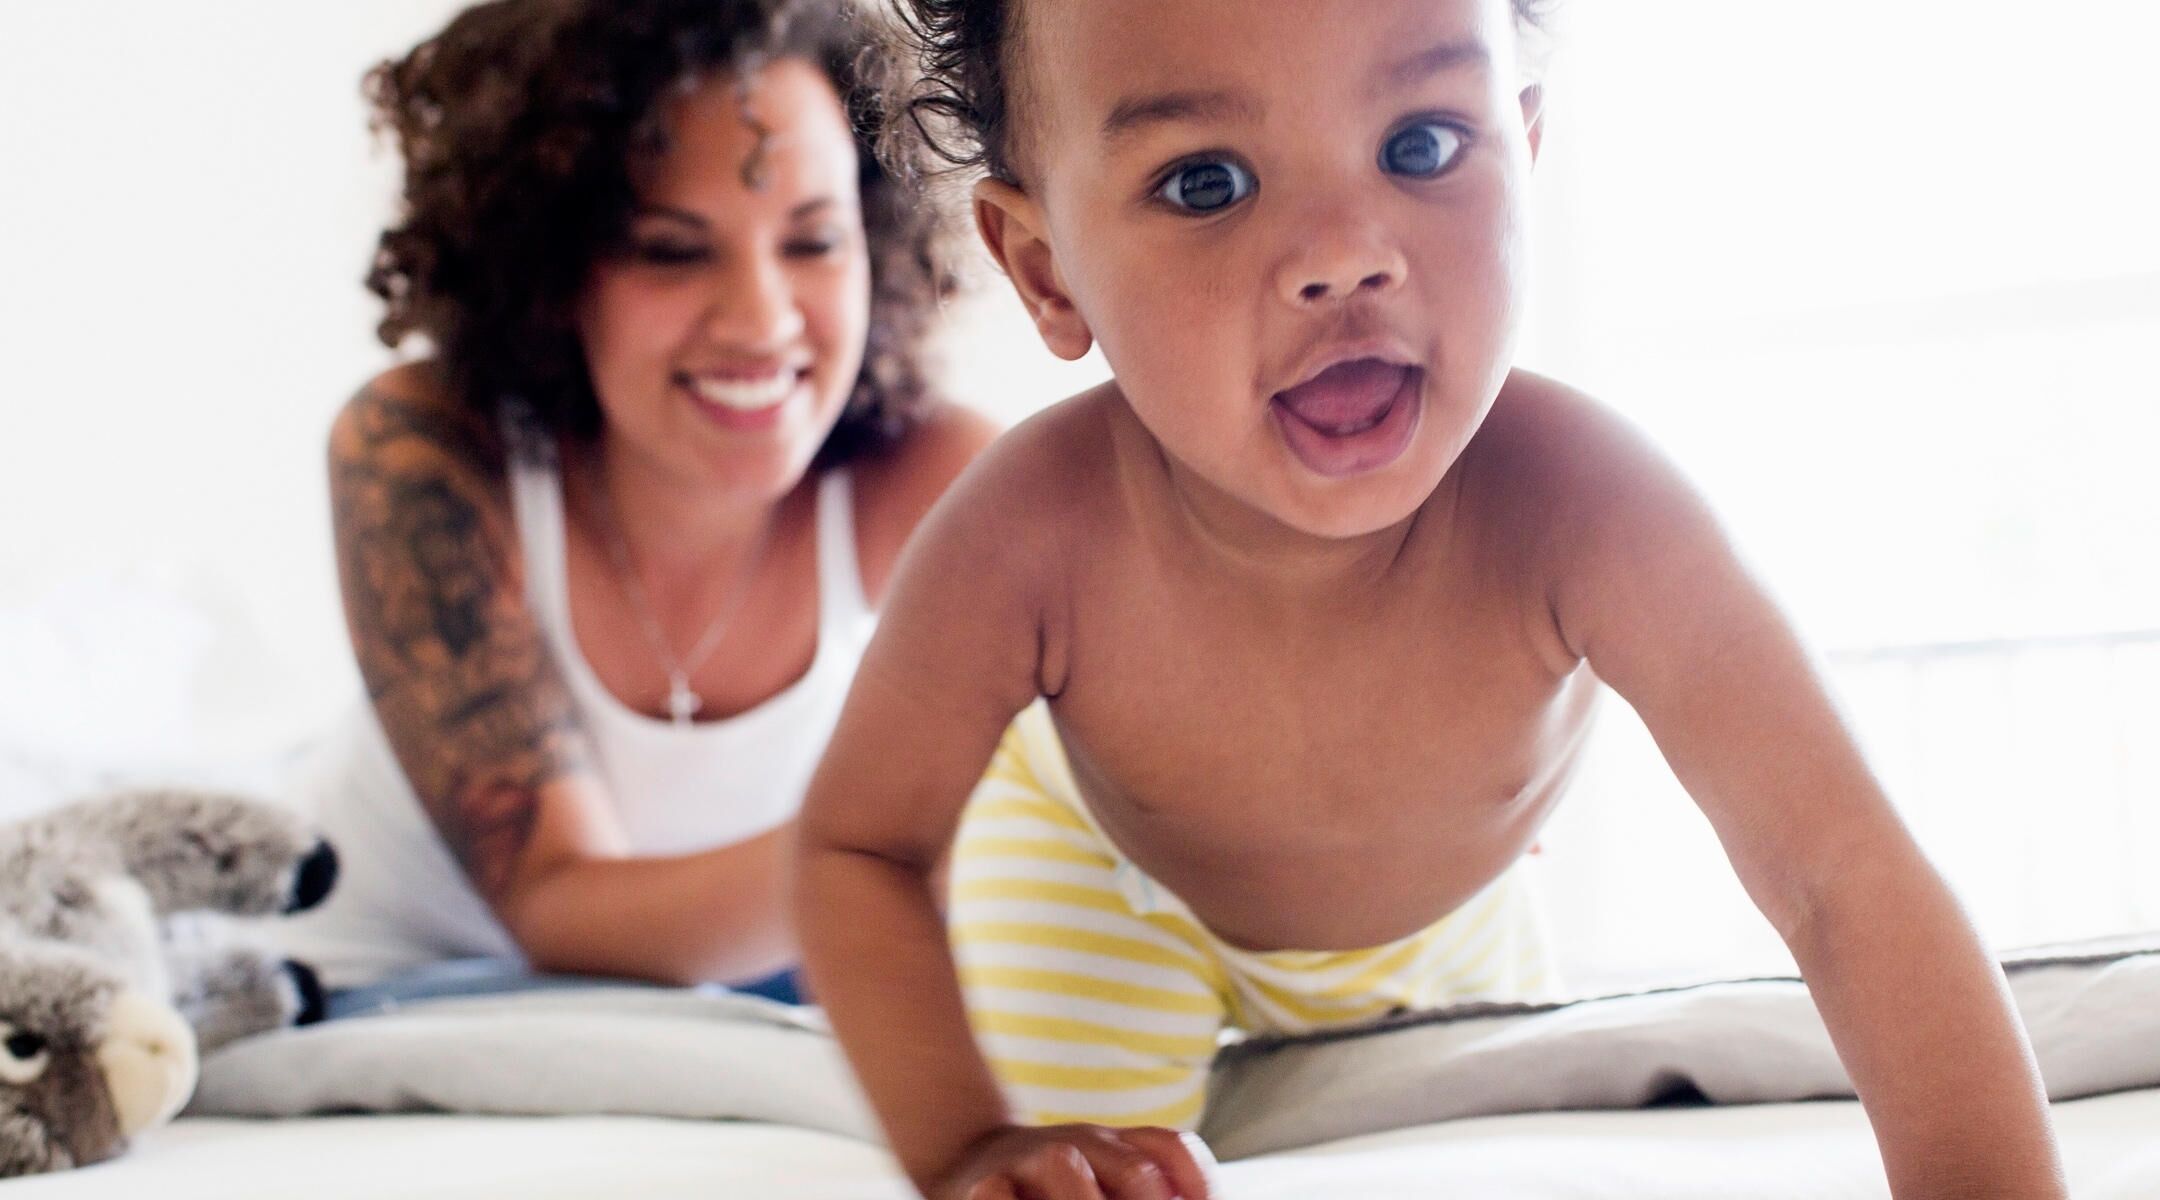 What It’s Really Like to Be a Stay-at-Home Mom